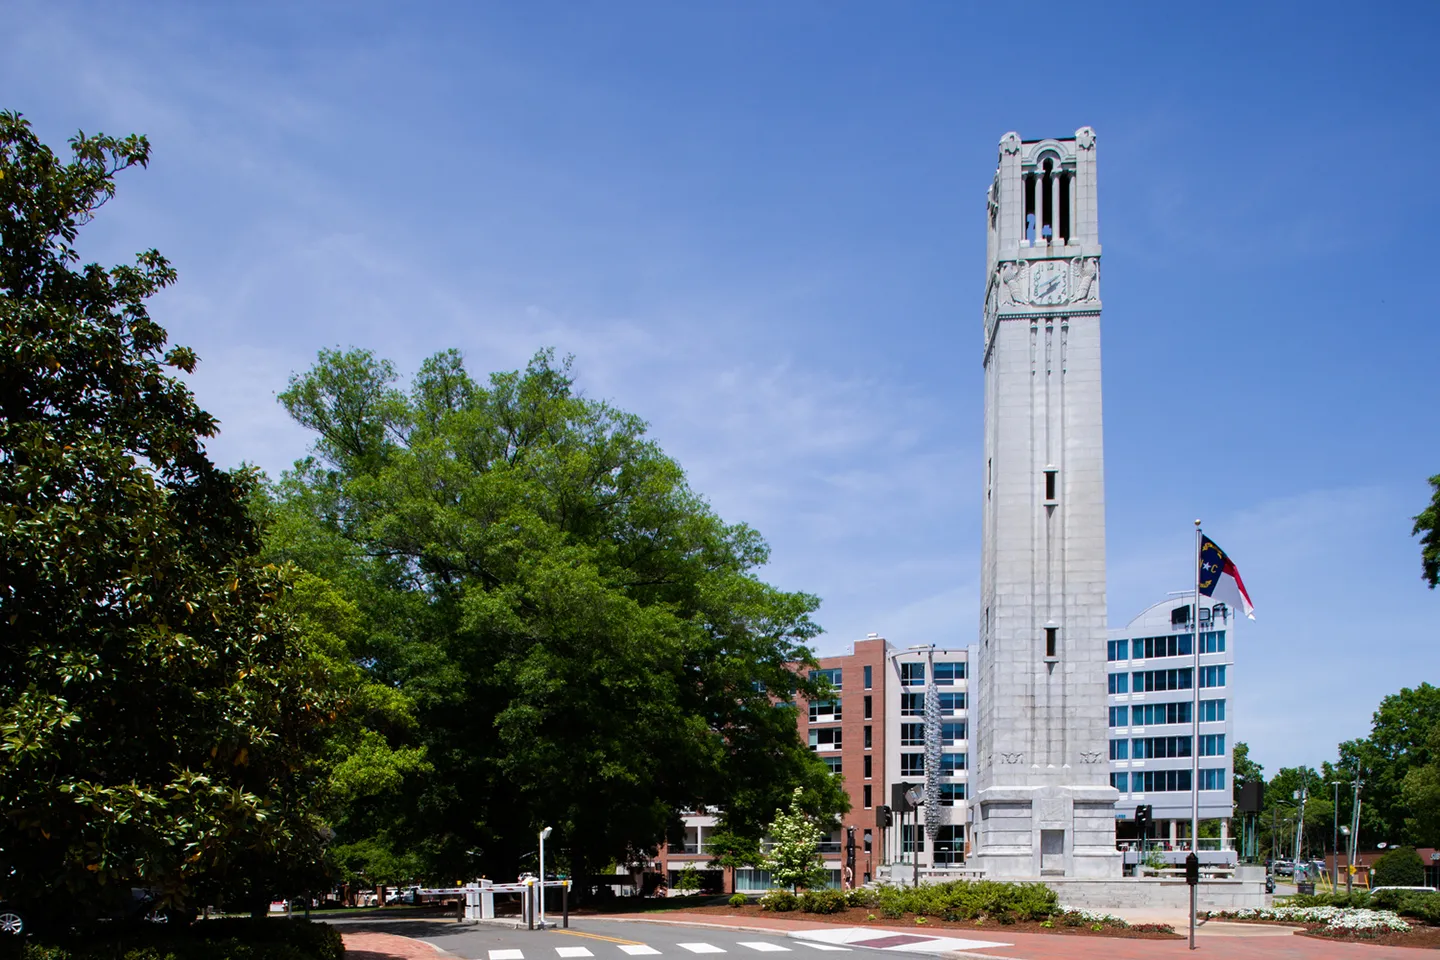 Raleigh, located in Wake County, is home to North Carolina State University. As the university continues to grow in enrollment numbers, so too must the surrounding area. 